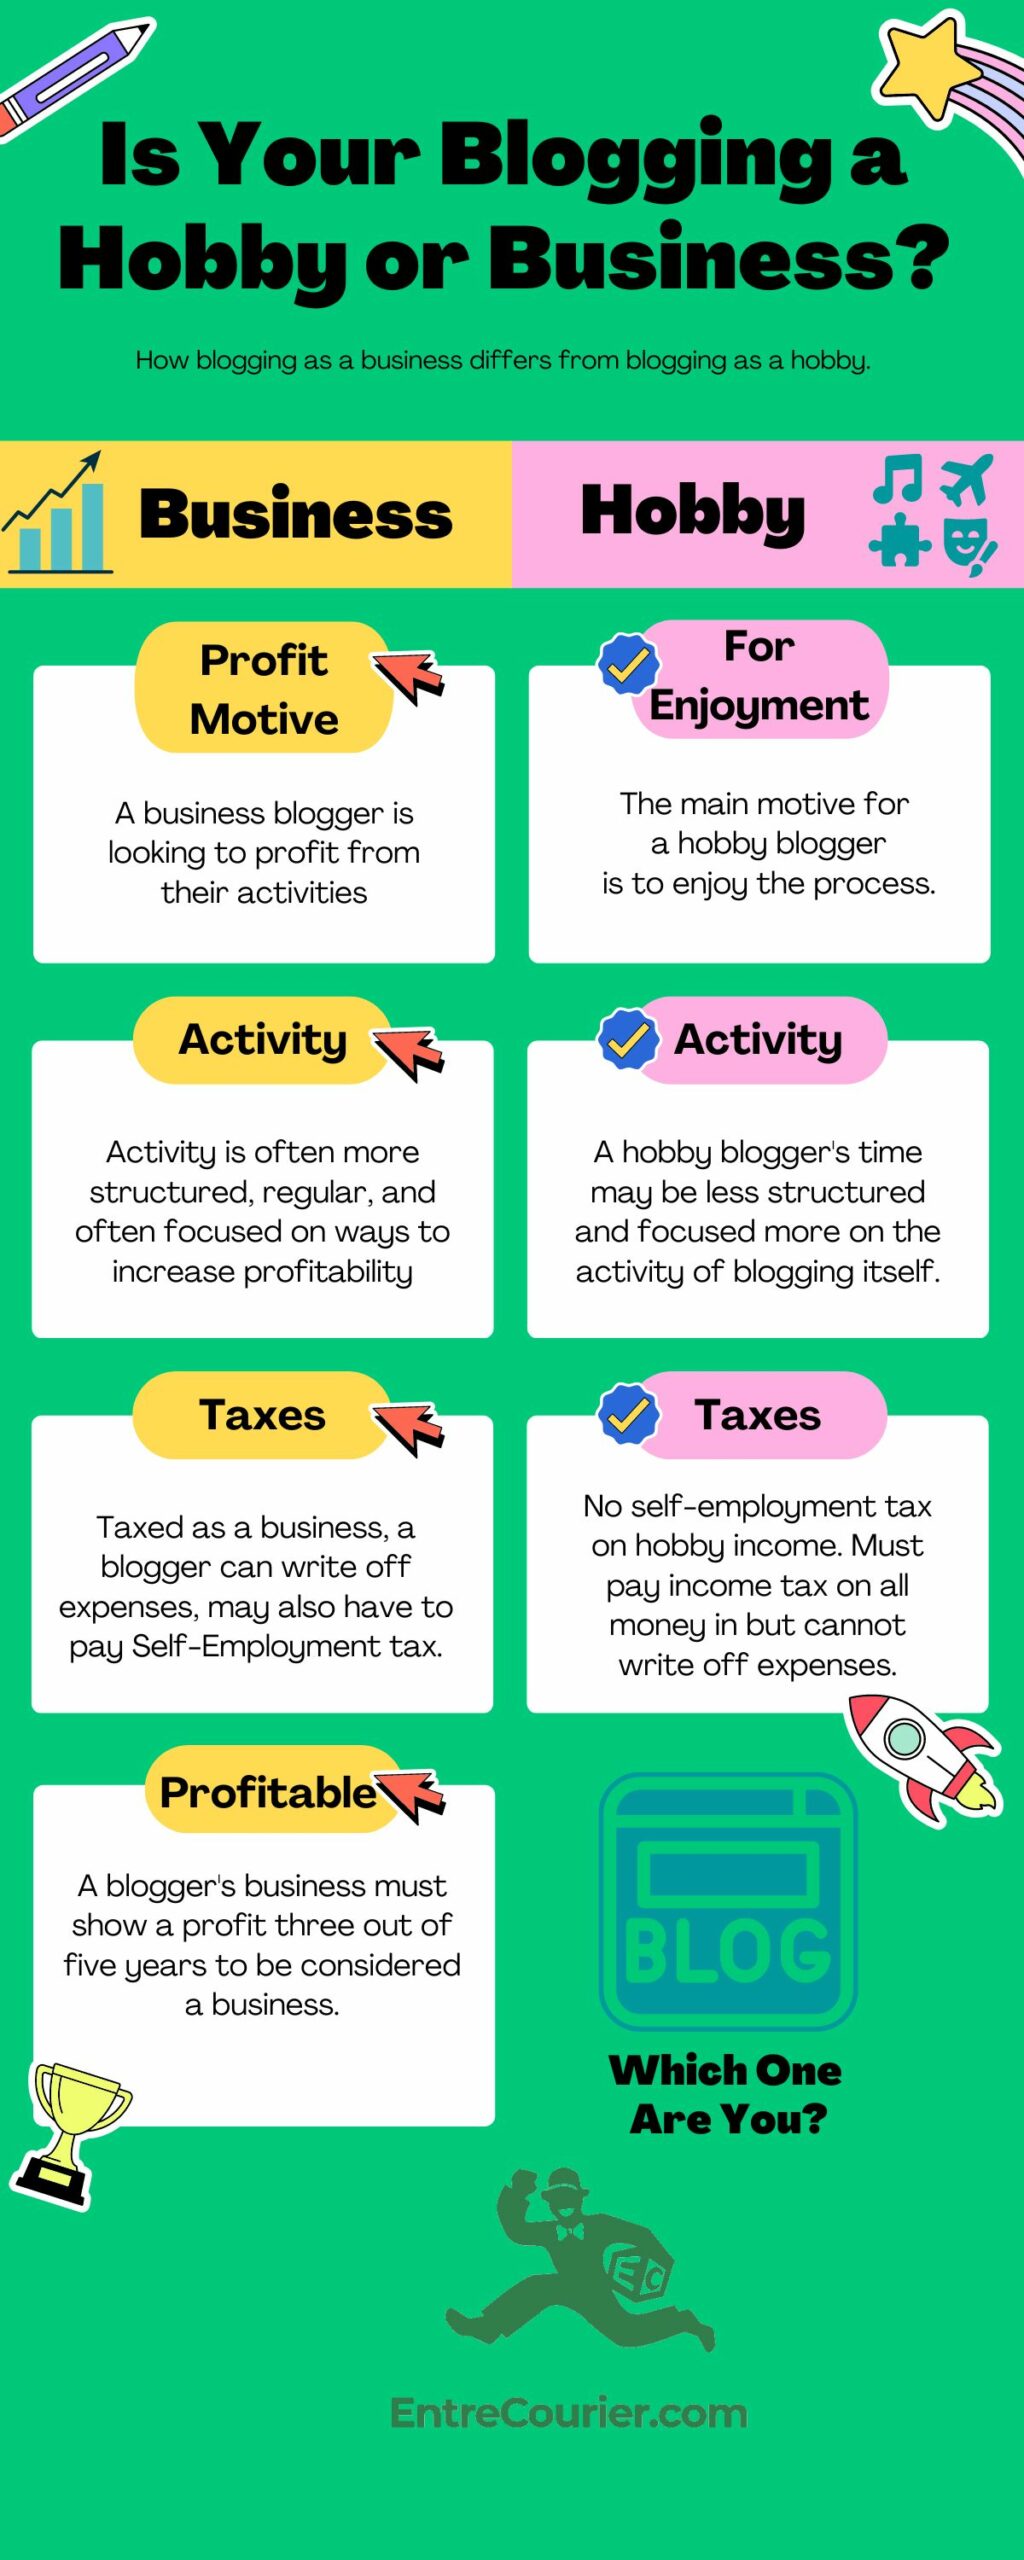 Infographic examining whether blogging is a hobby or blog looking at activity, taxes, motive and profitability.